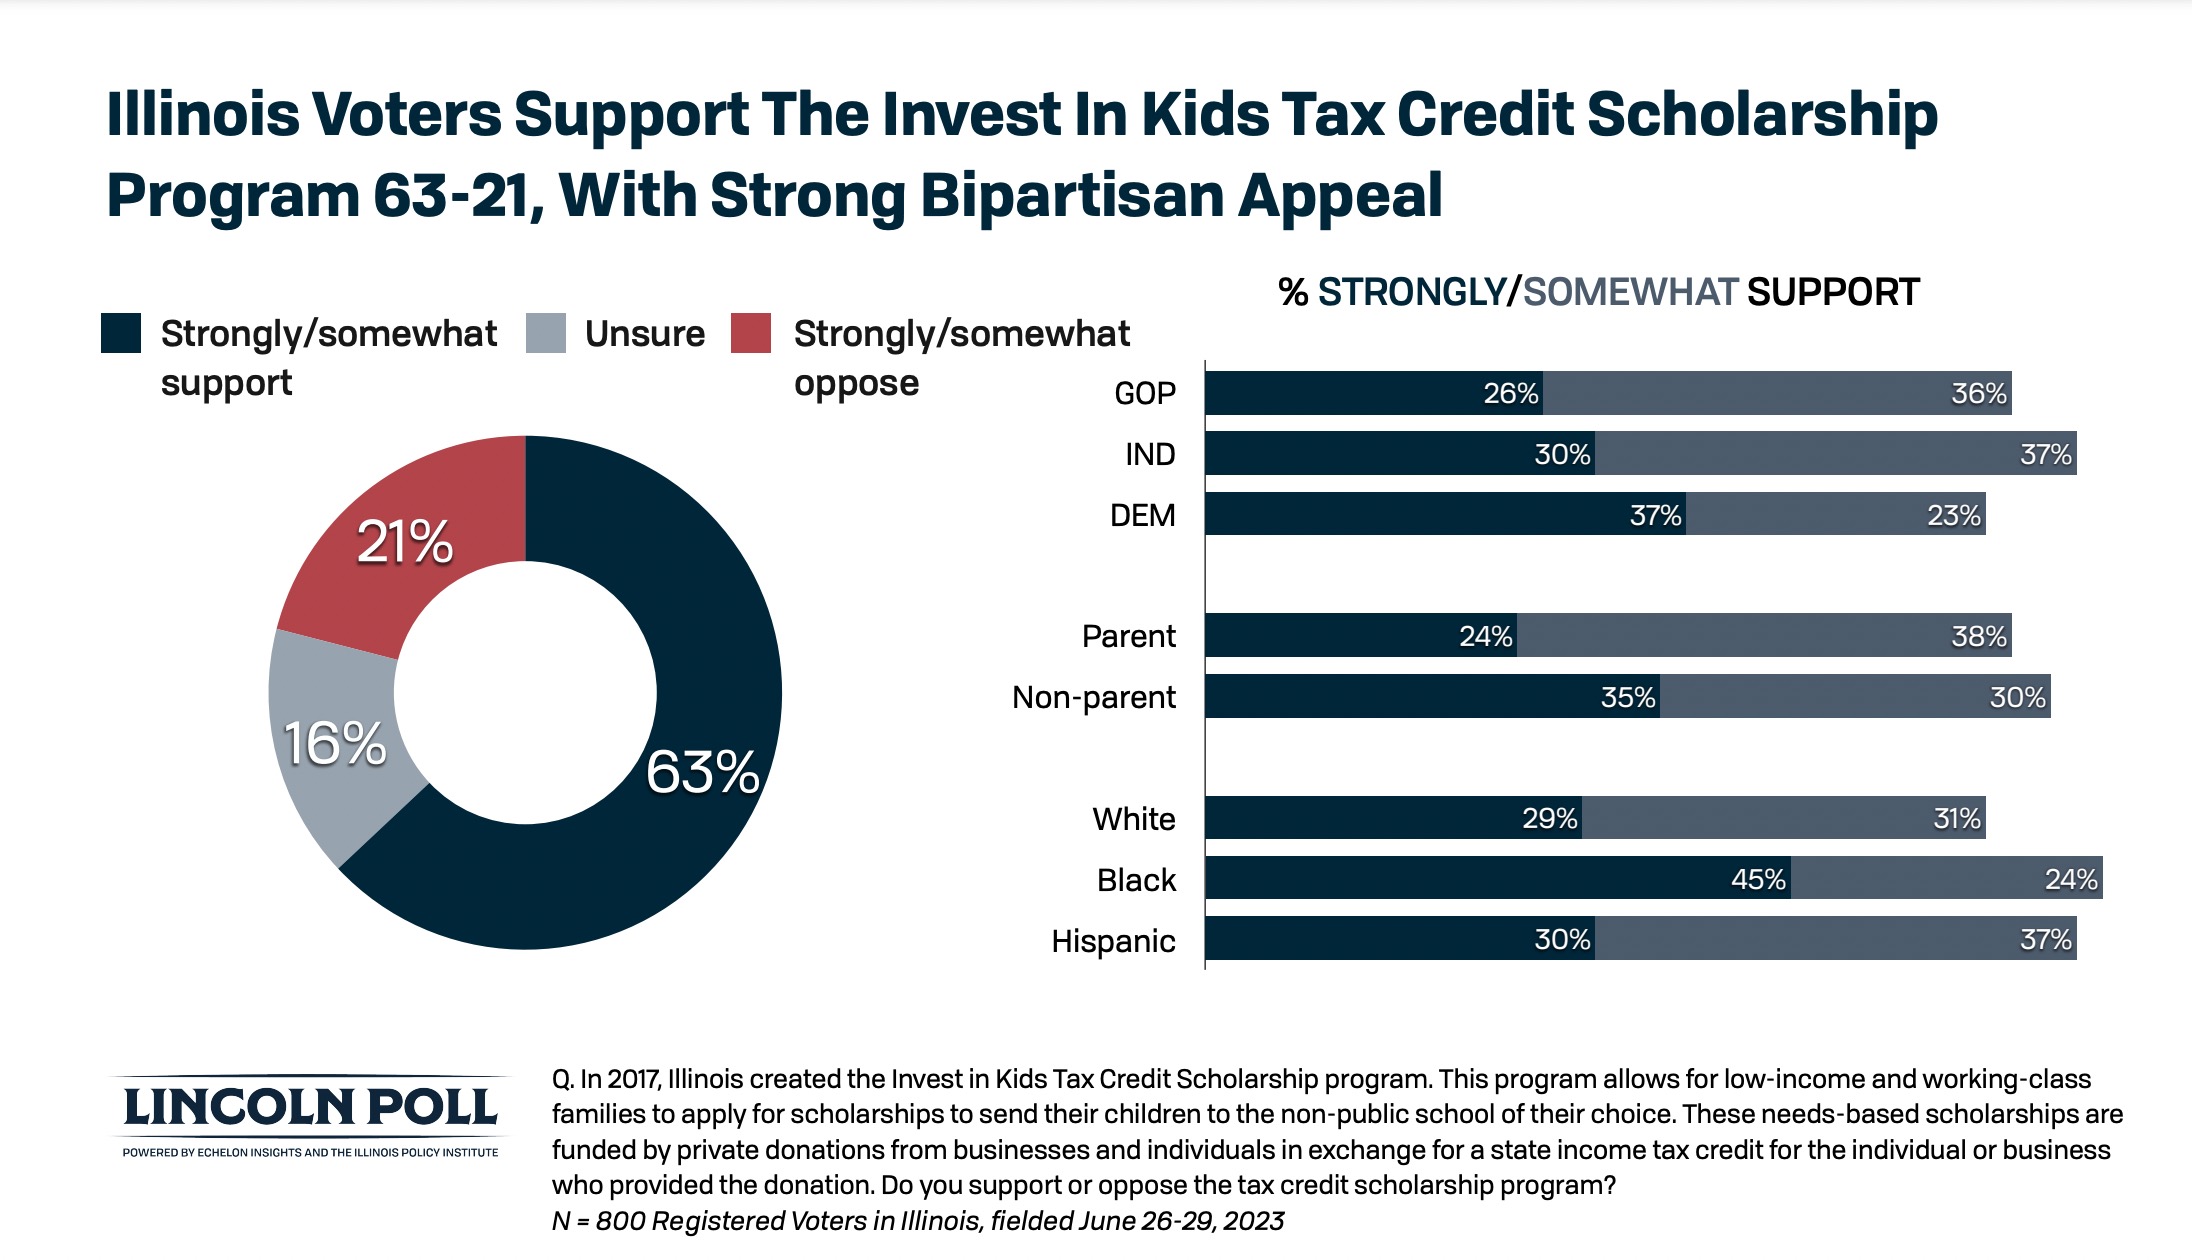 Illinois Voters Support The Invest In Kids Tax Credit Scholarship Program 63-21, With Strong Bipartisan Appeal